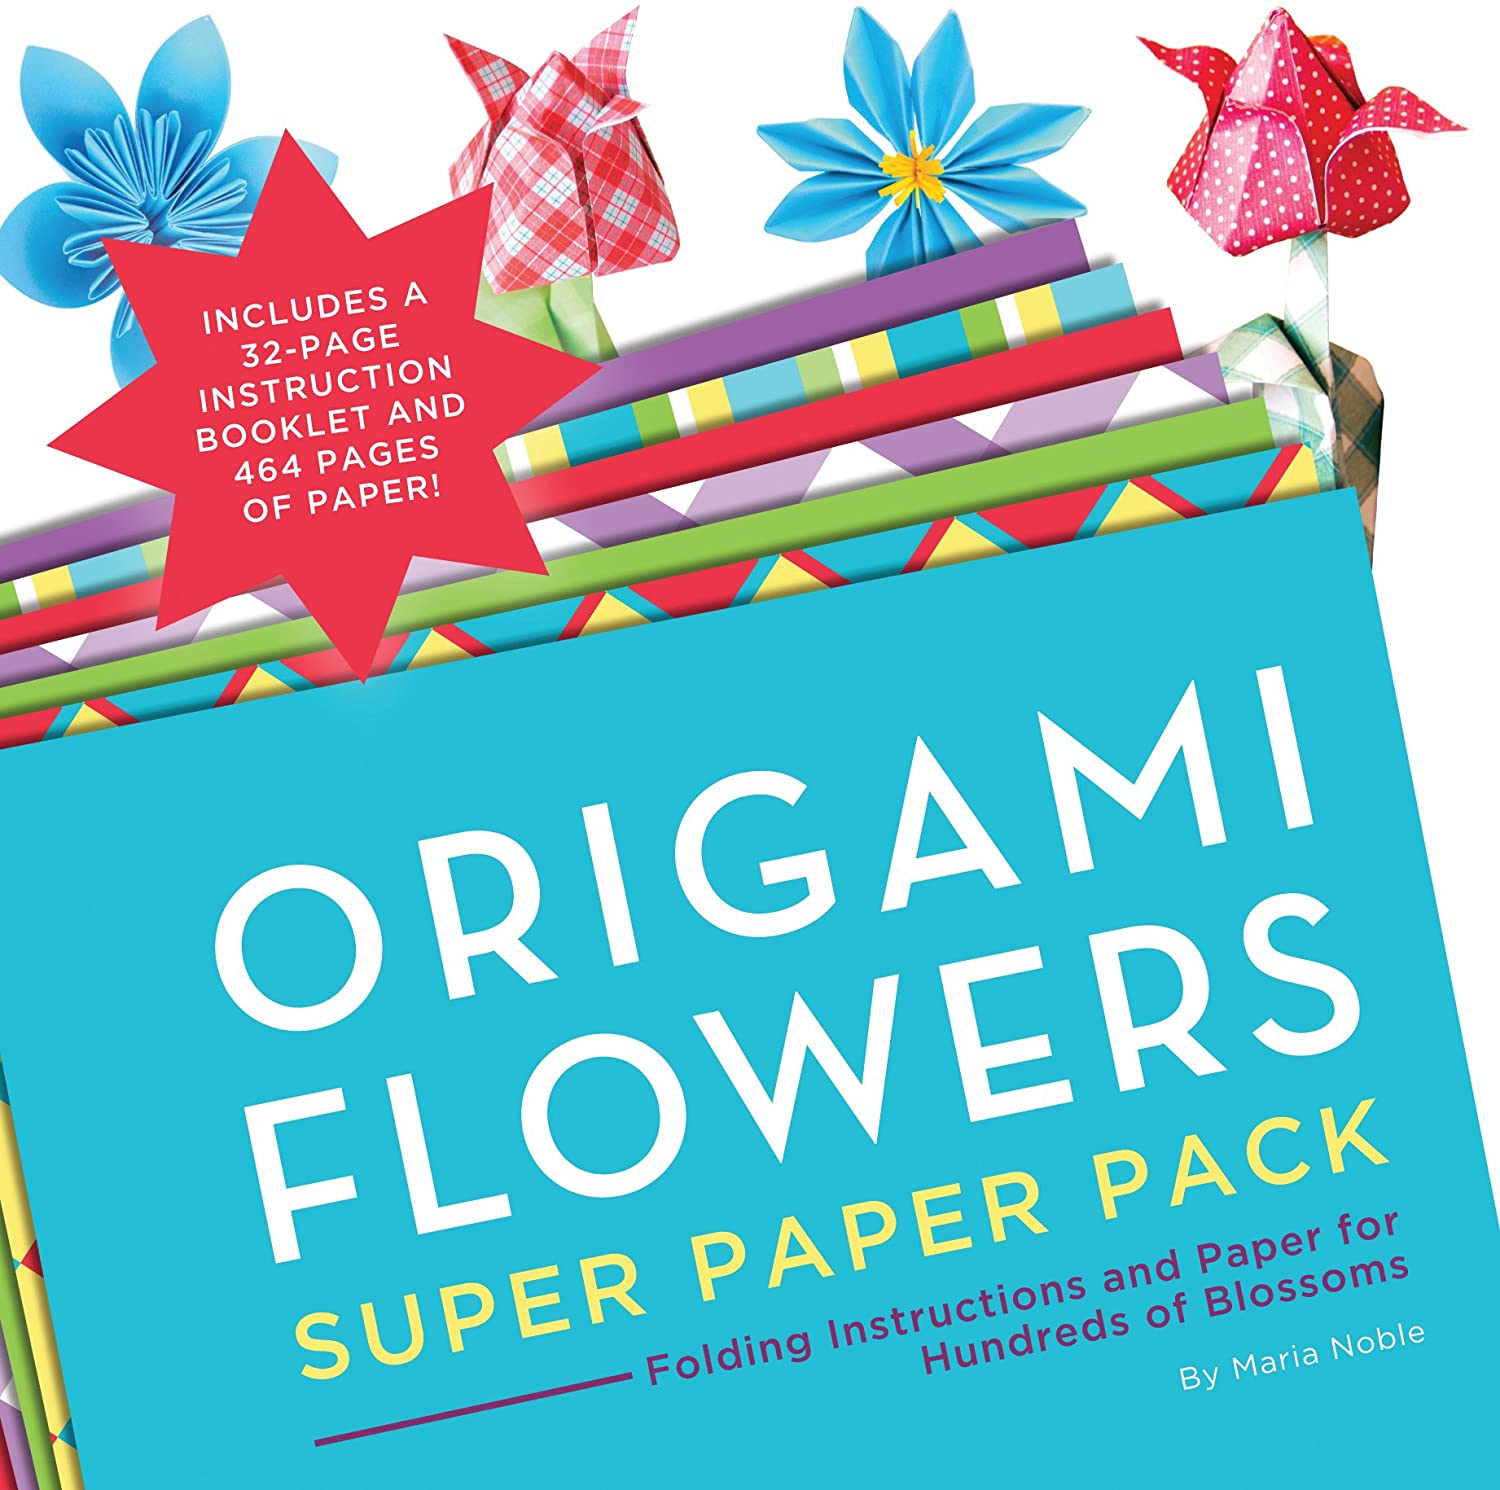 How to make an easy origami rose – Origami flowers super paper pack